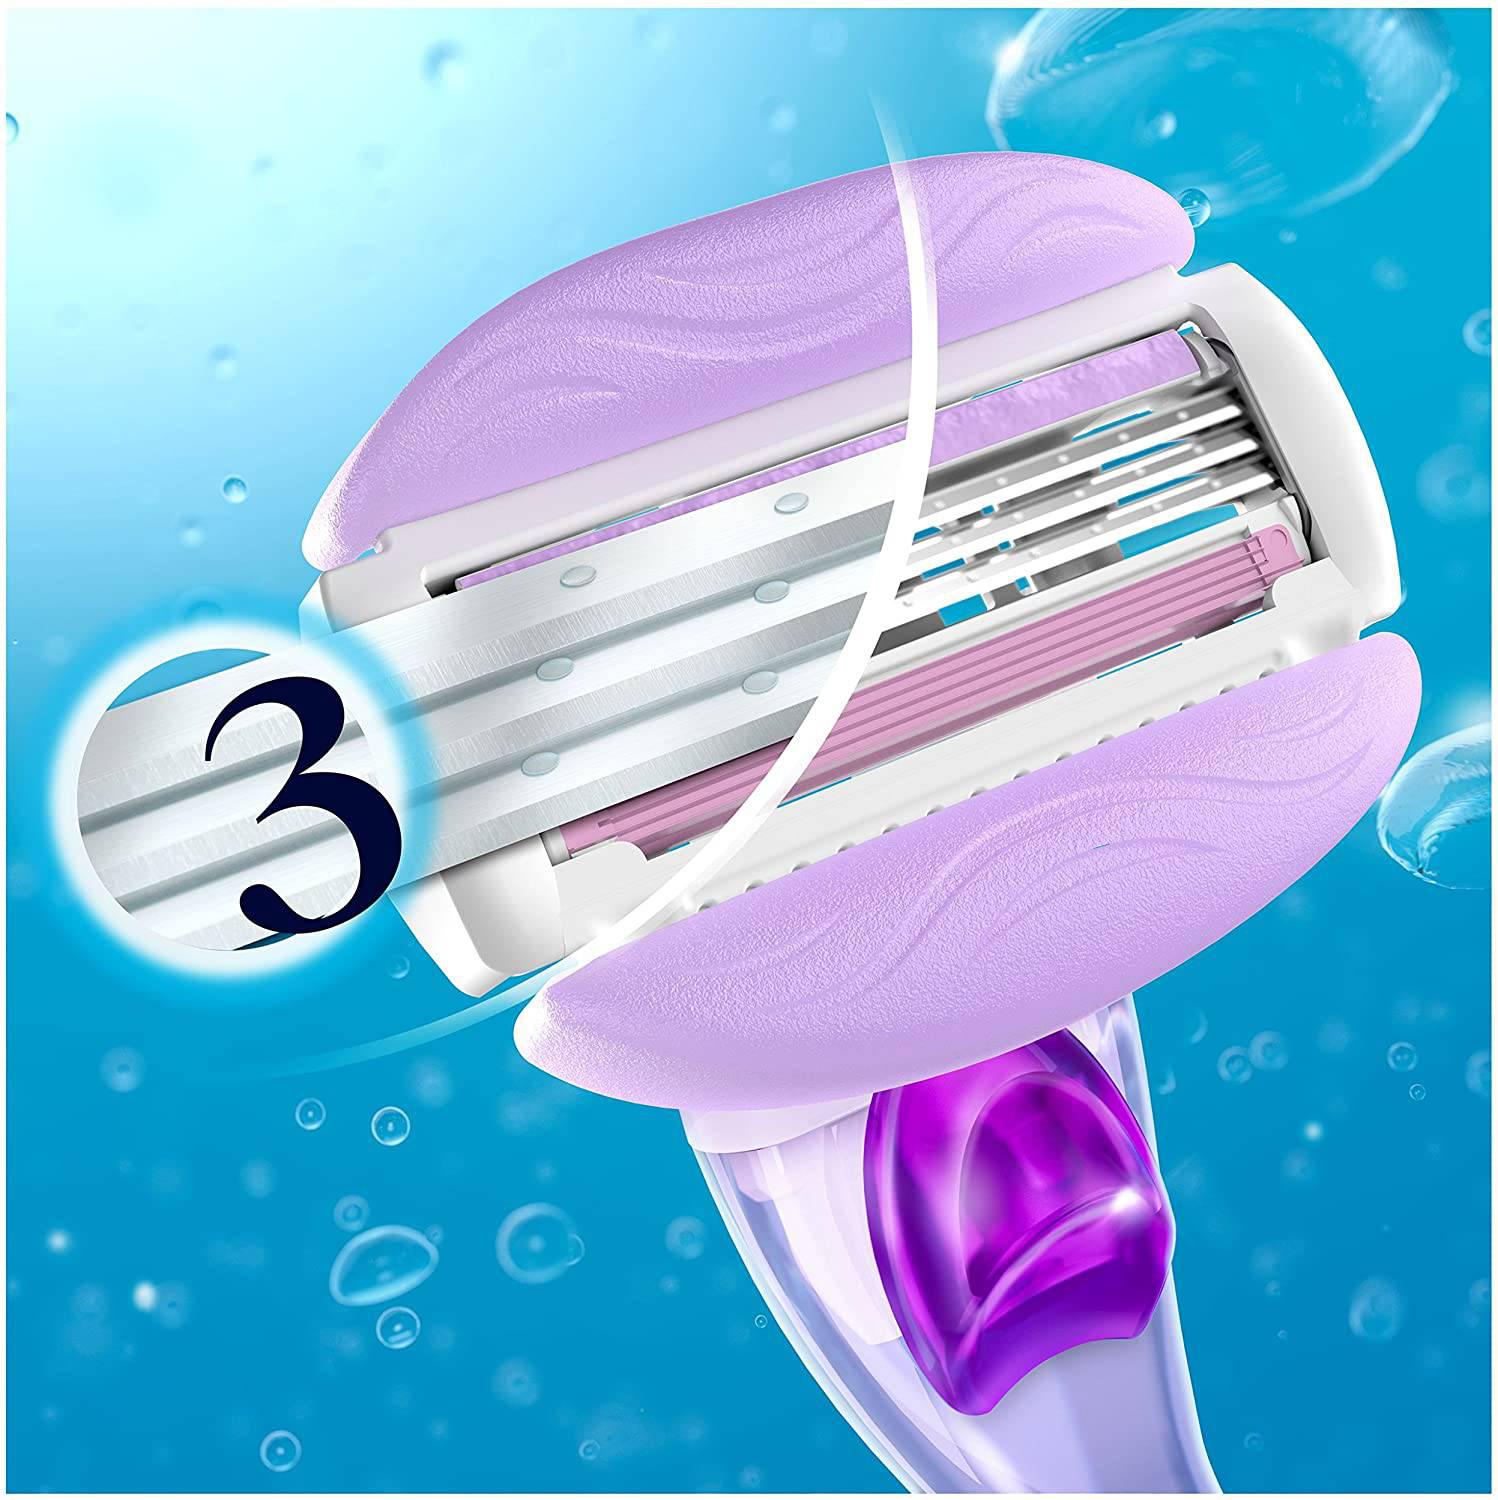 Gillette Venus Breeze 2 in 1 Smooth-shave Razor Cartridge Made for Women, 4 Pack - Healthxpress.ie